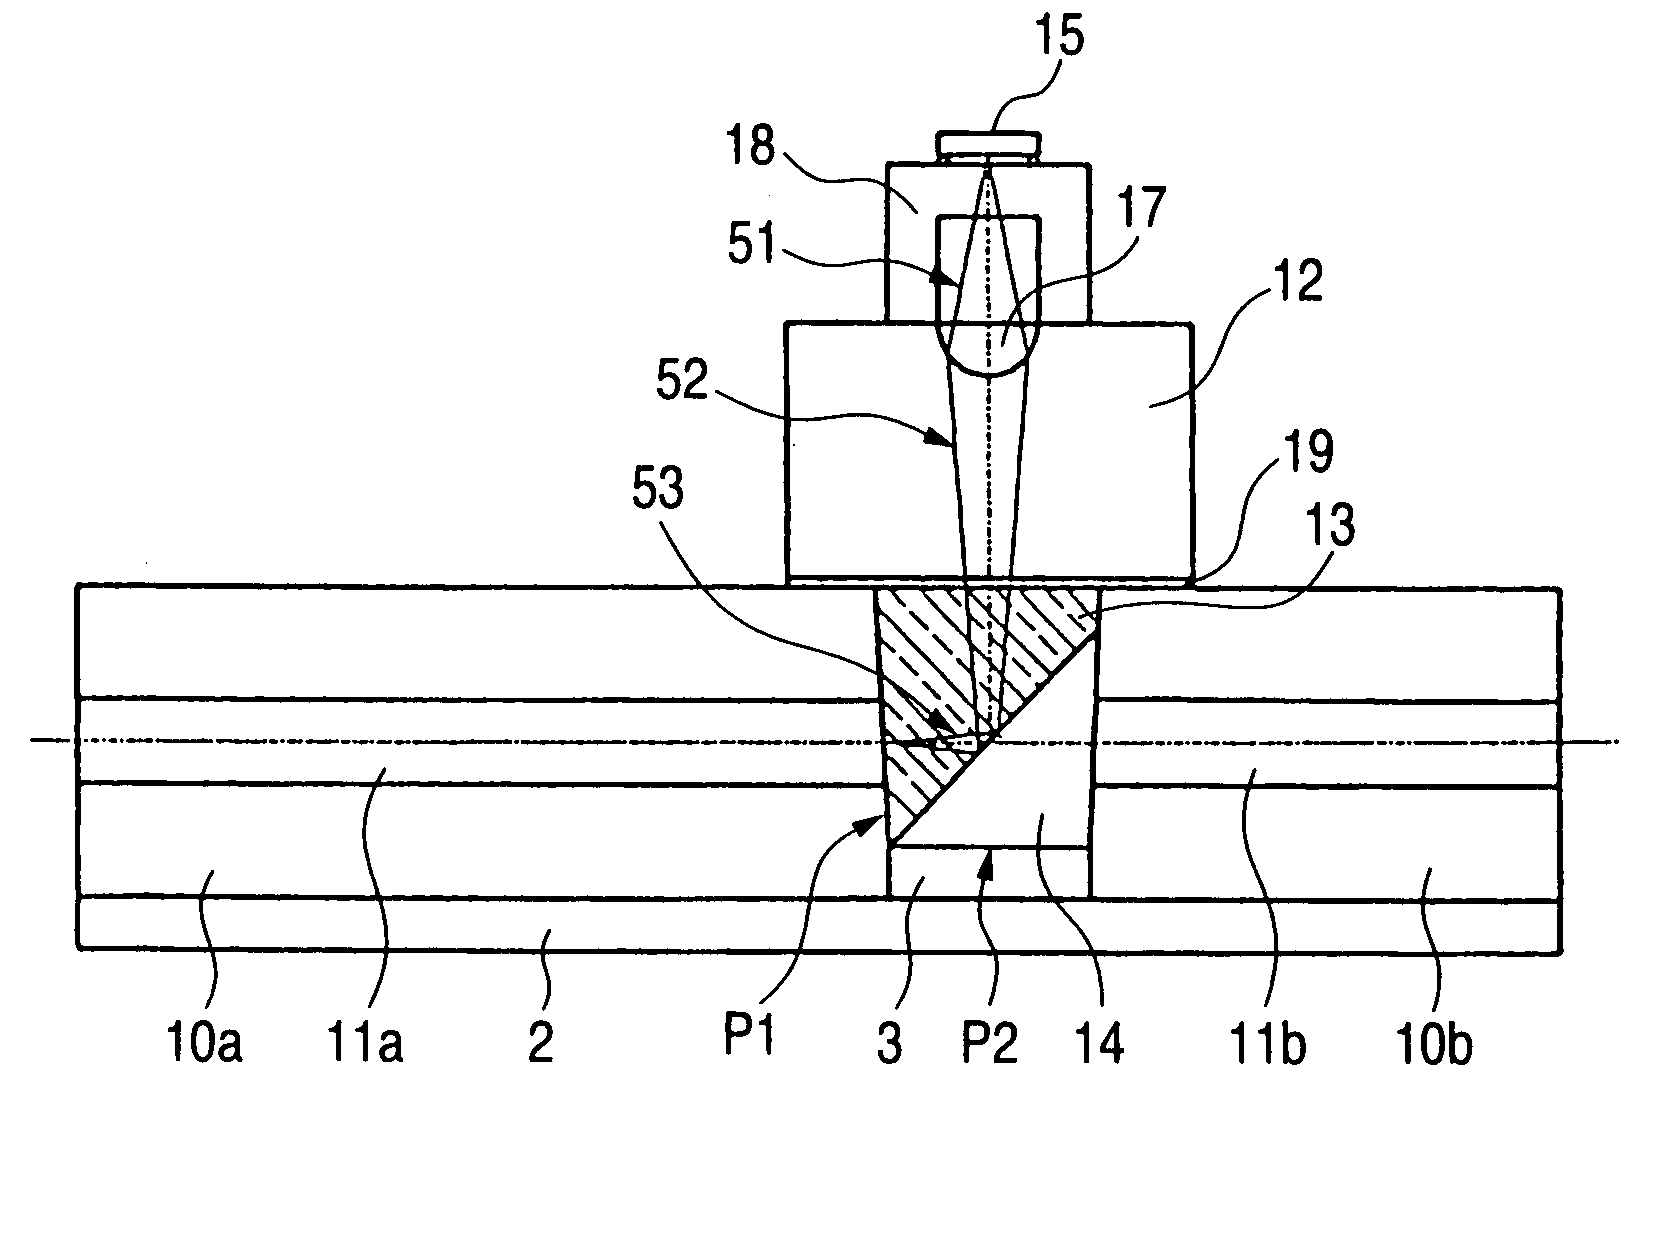 Optical connection device